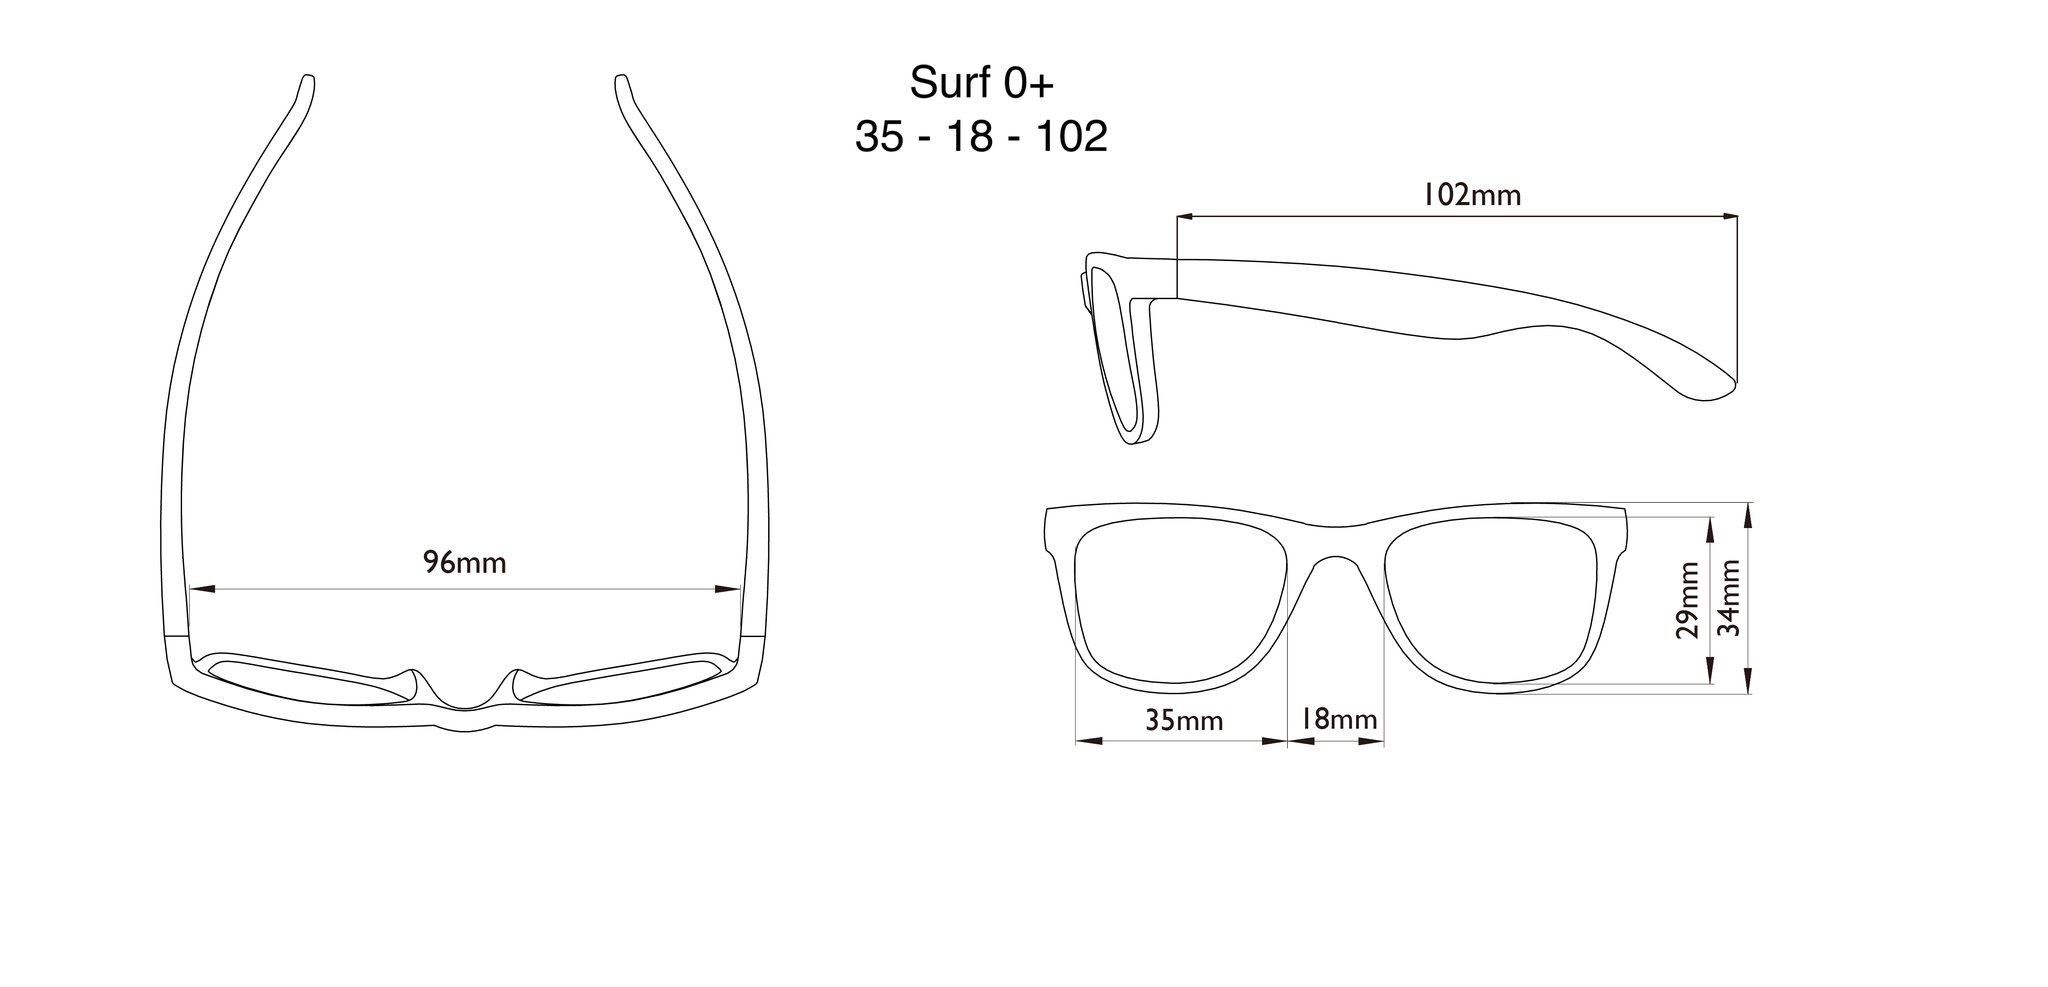 Dimensions of the Surf Baby Sunglasses